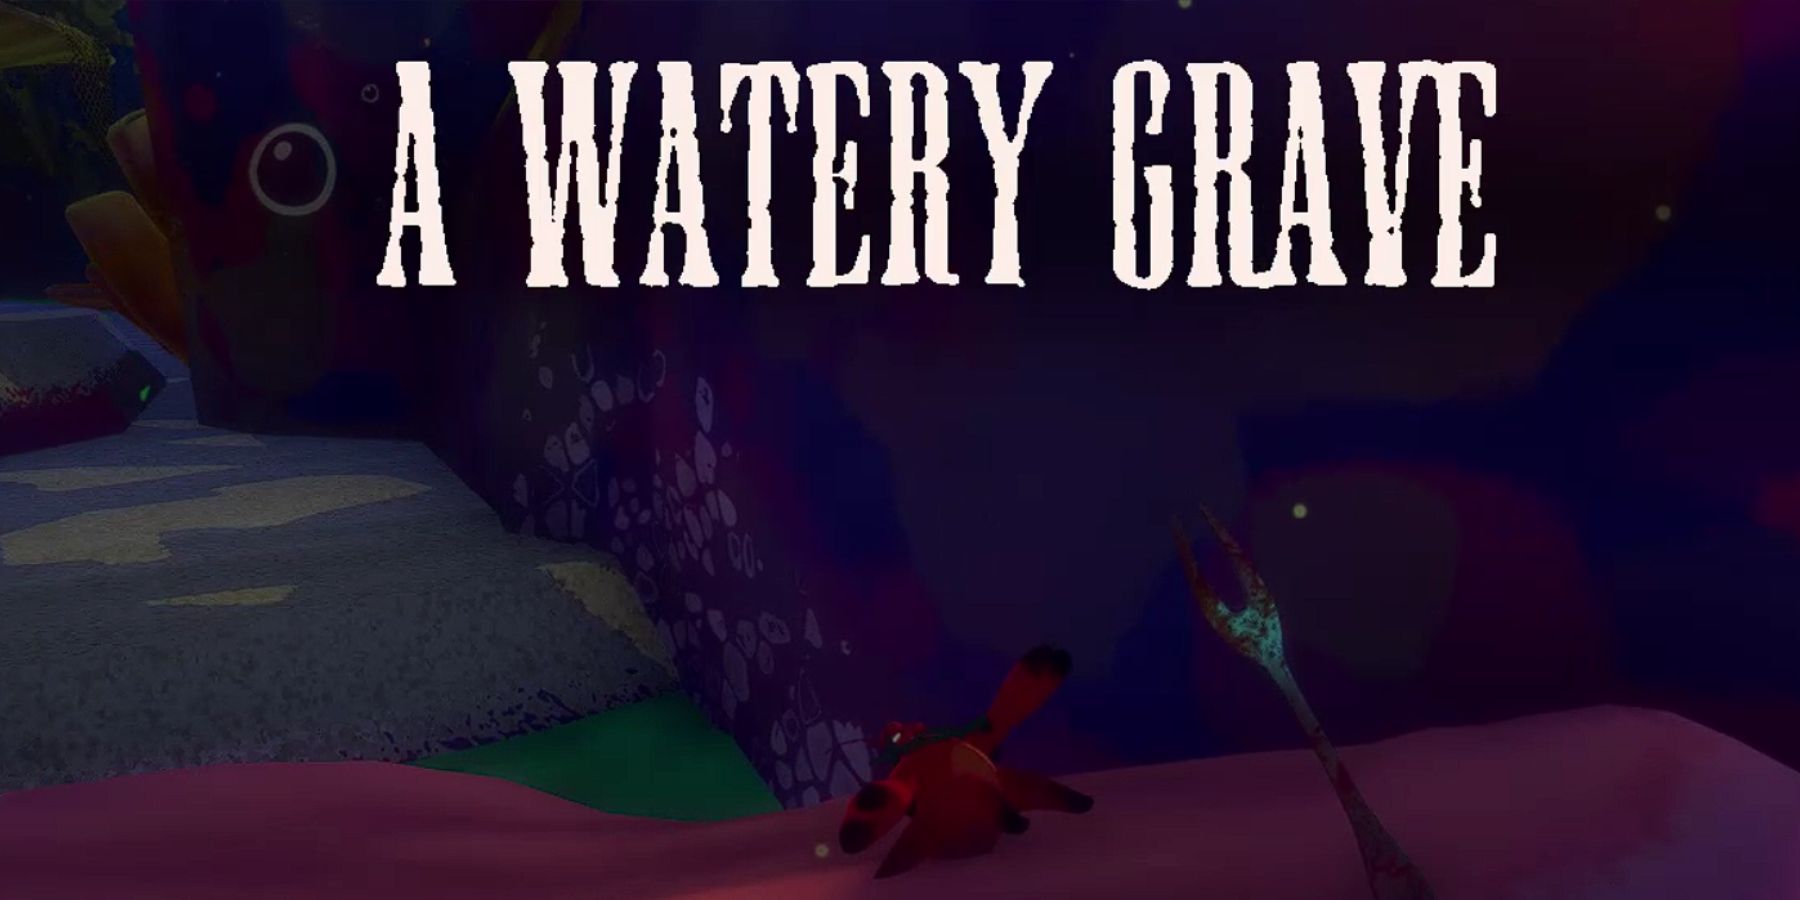 Another Crab's Treasure Instantly Die Watery Grave Game Over You Died Screen